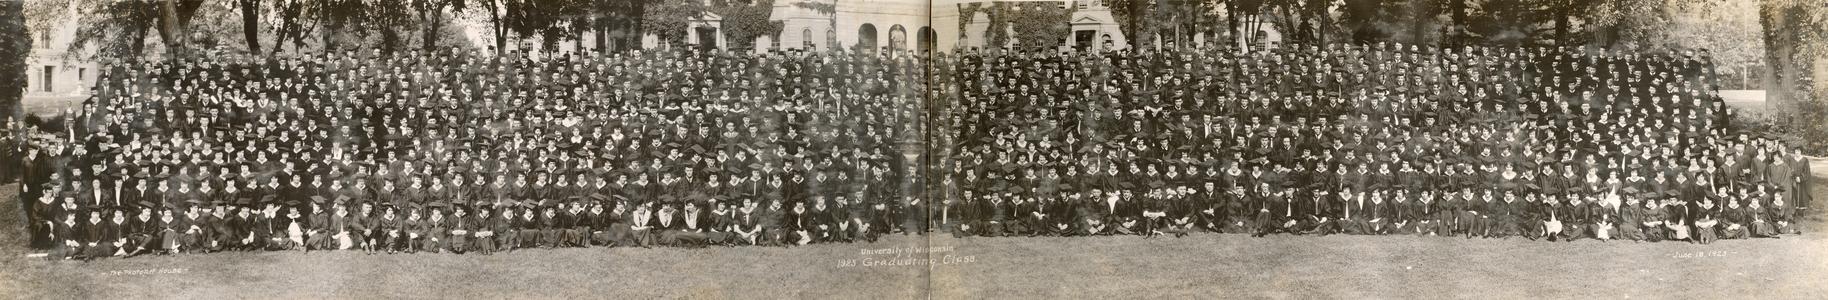 Class of 1923 Commencement